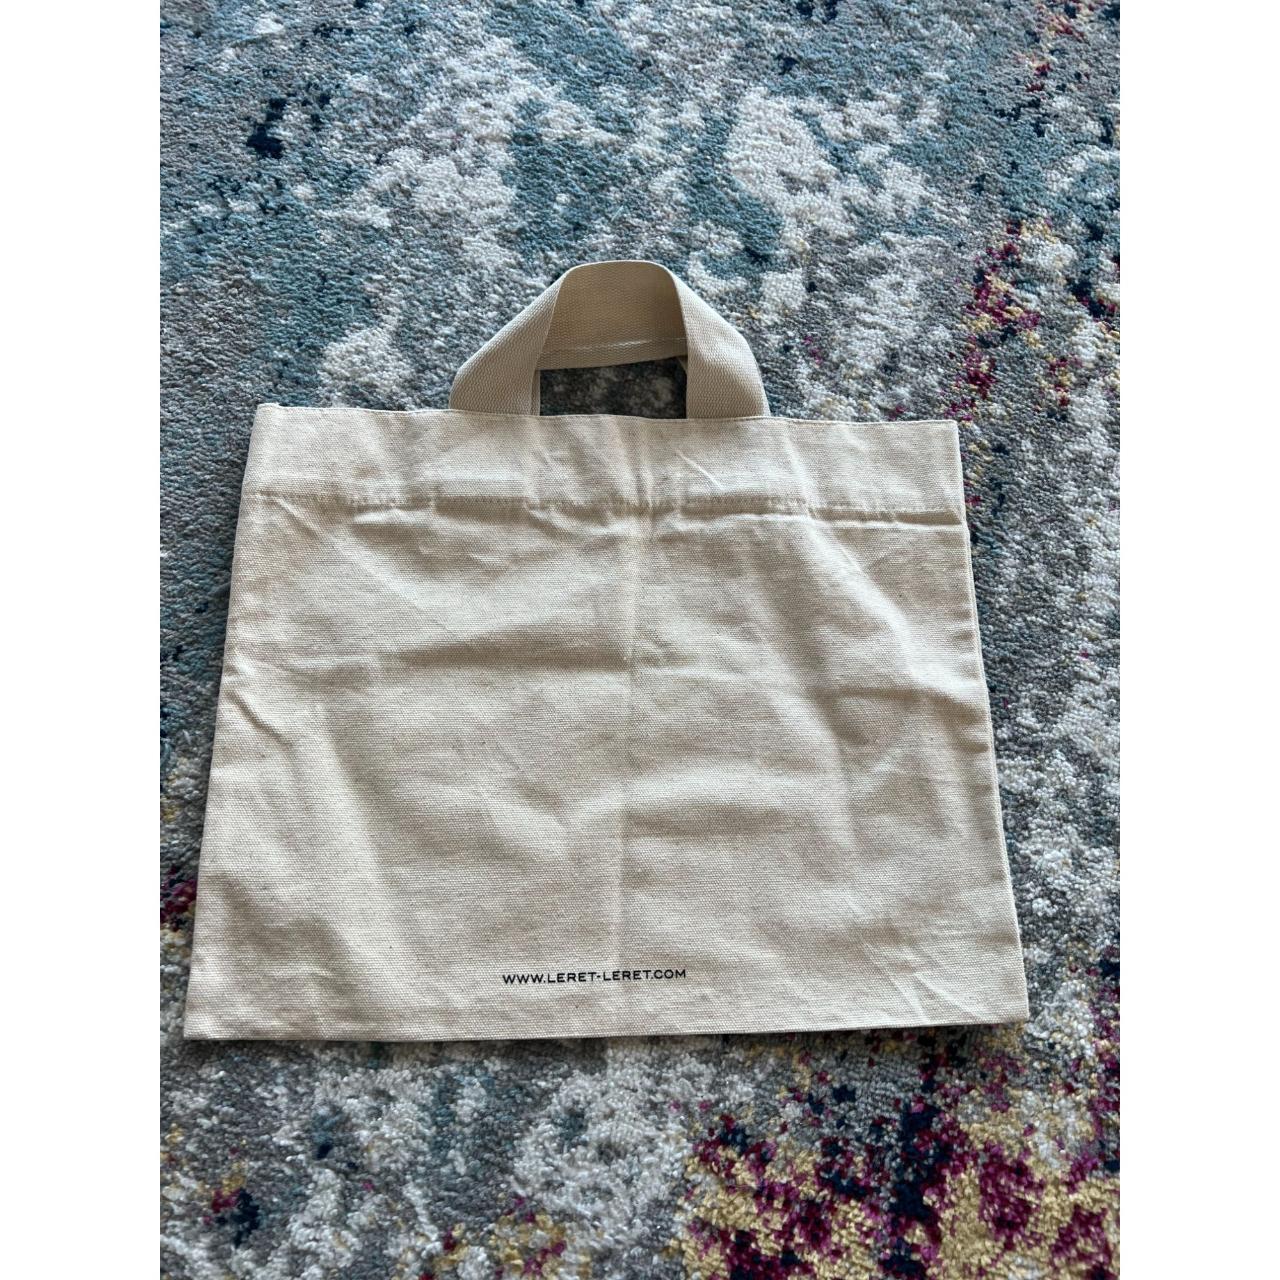 Product Image 2 - LERET Canvas Tote Bag Great